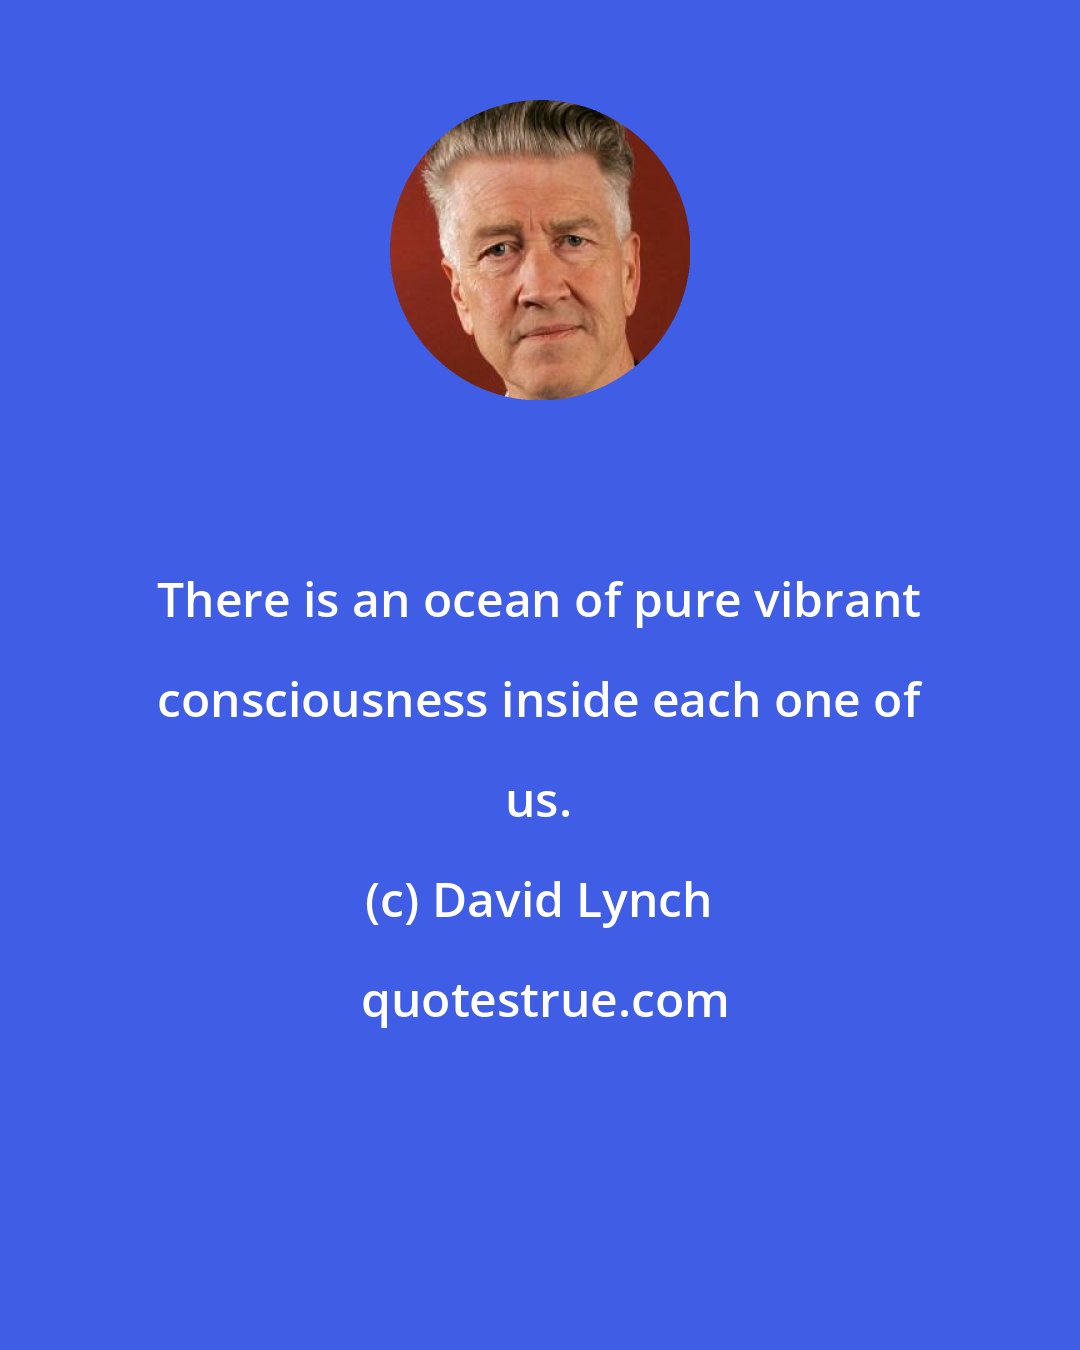 David Lynch: There is an ocean of pure vibrant consciousness inside each one of us.